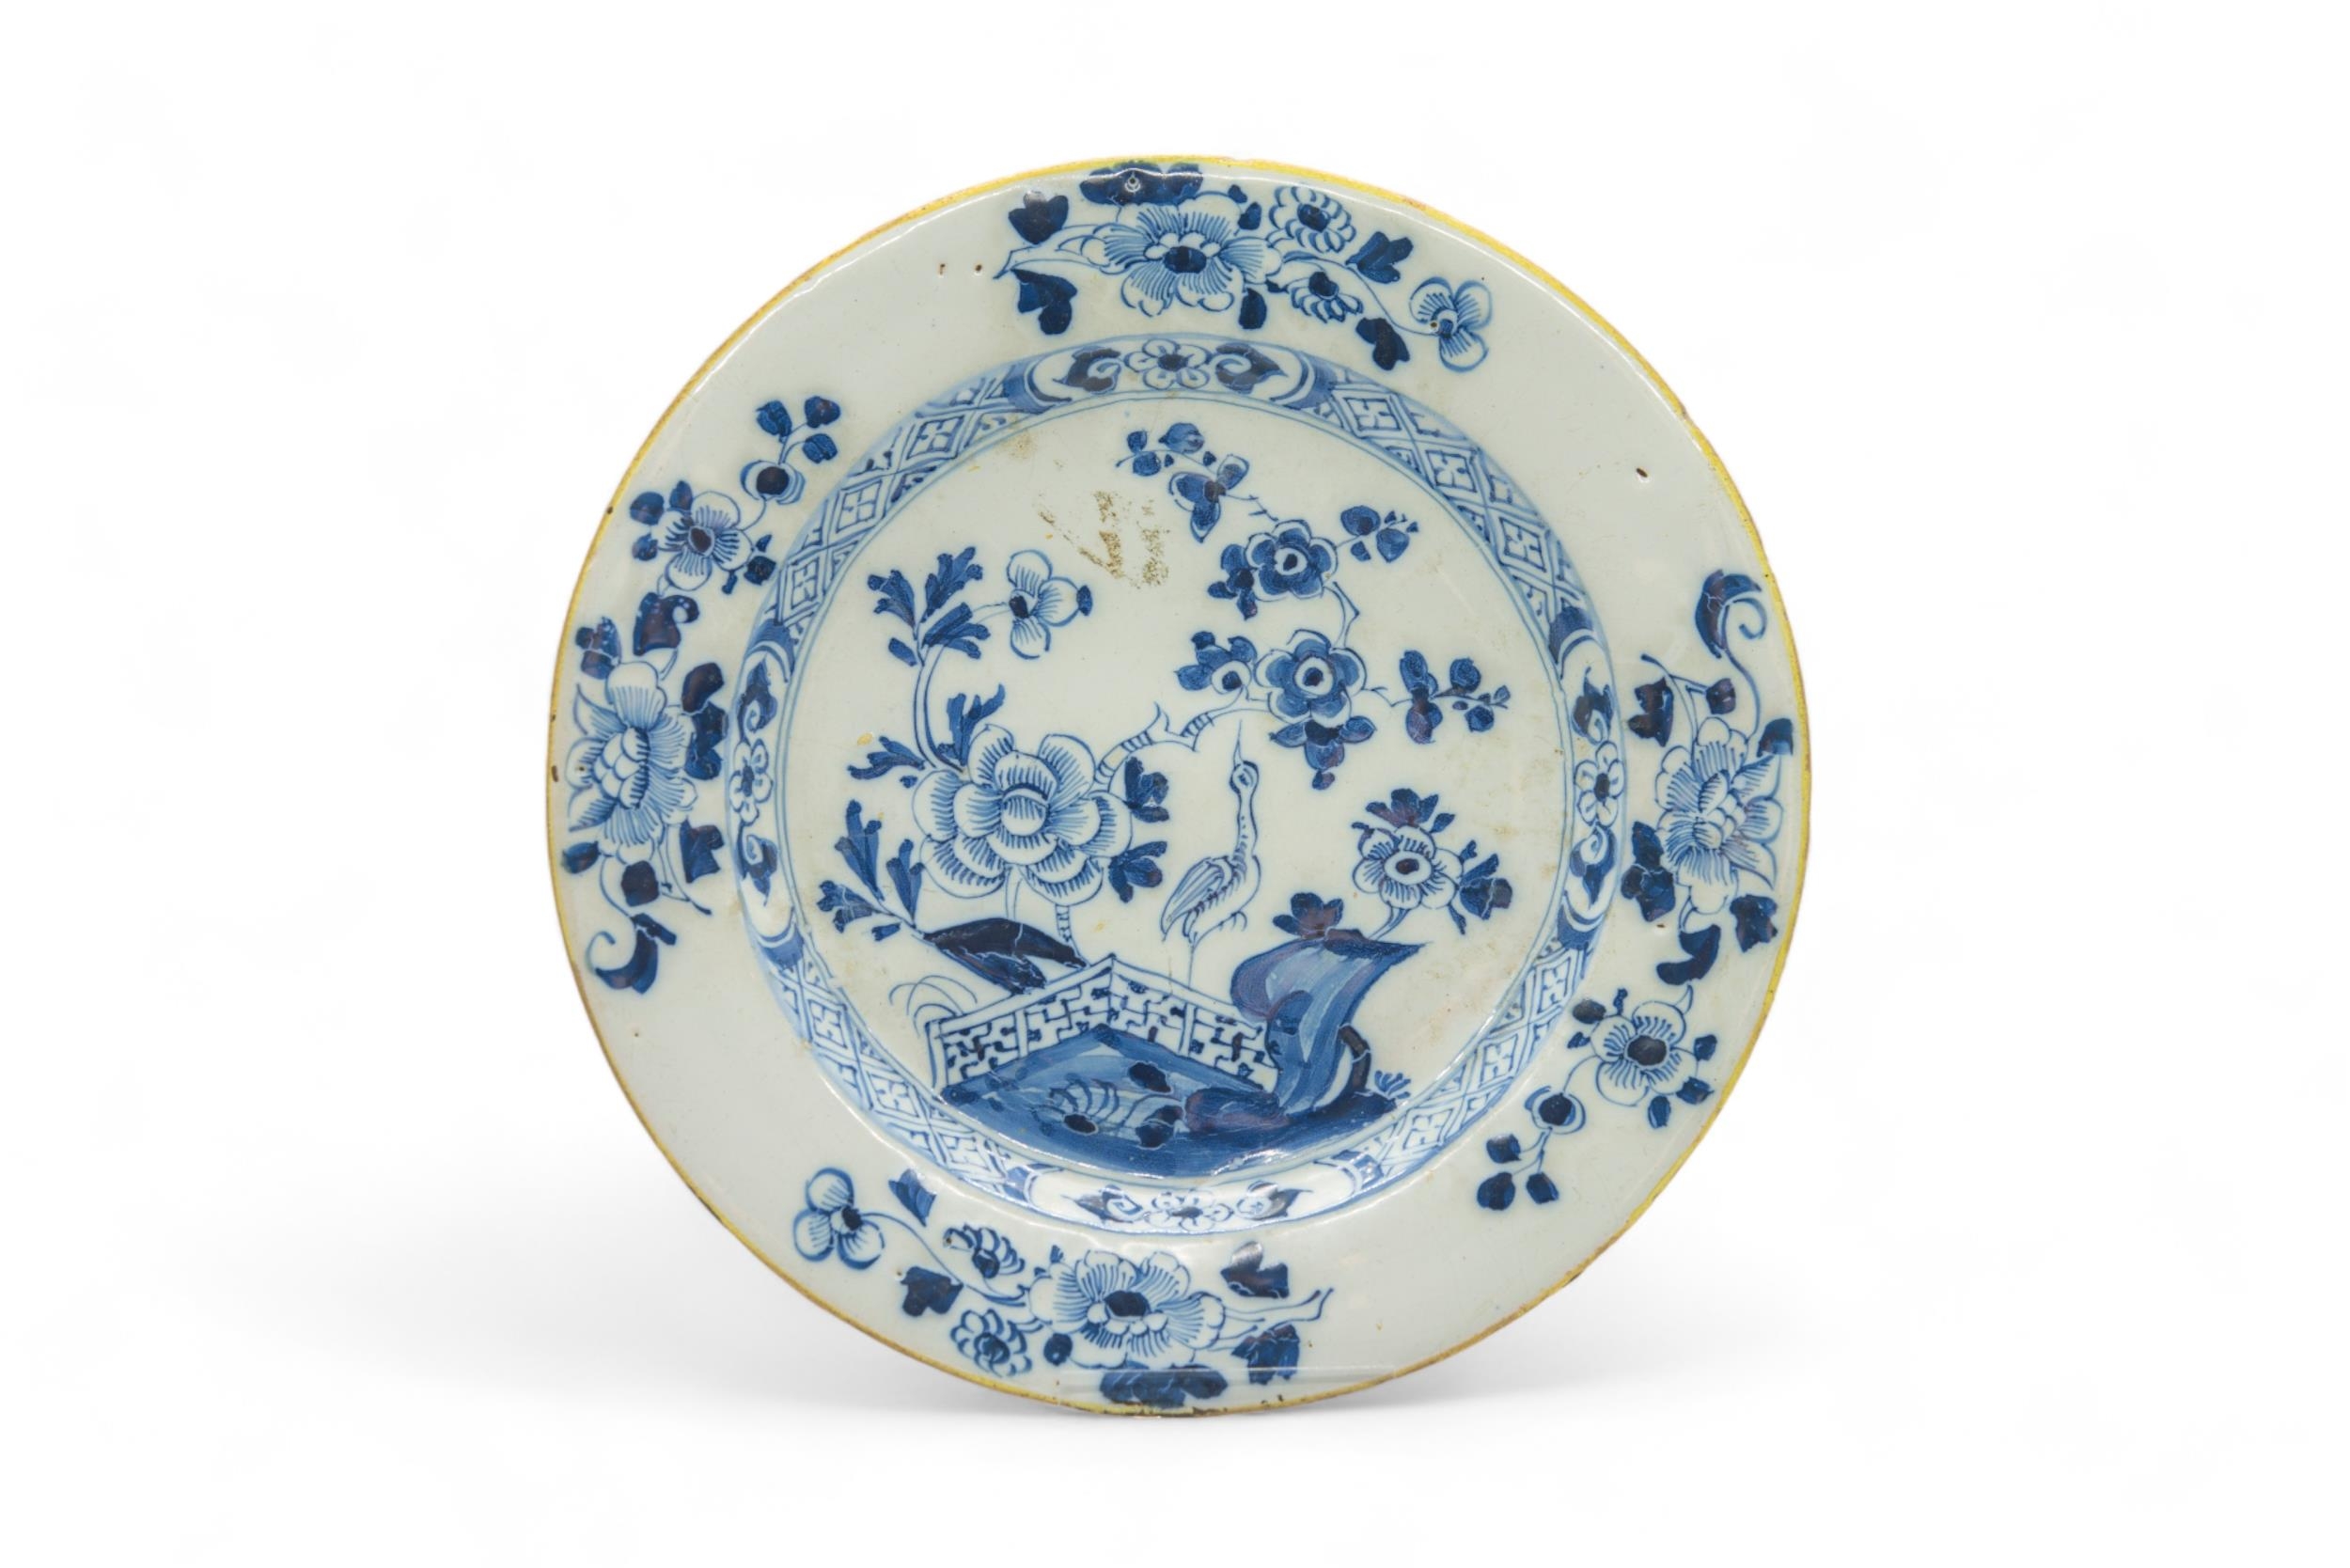 SIX DELFT PLATES 18th Century, one inscribed "T.M.LANE", 23cms wide - Image 3 of 7